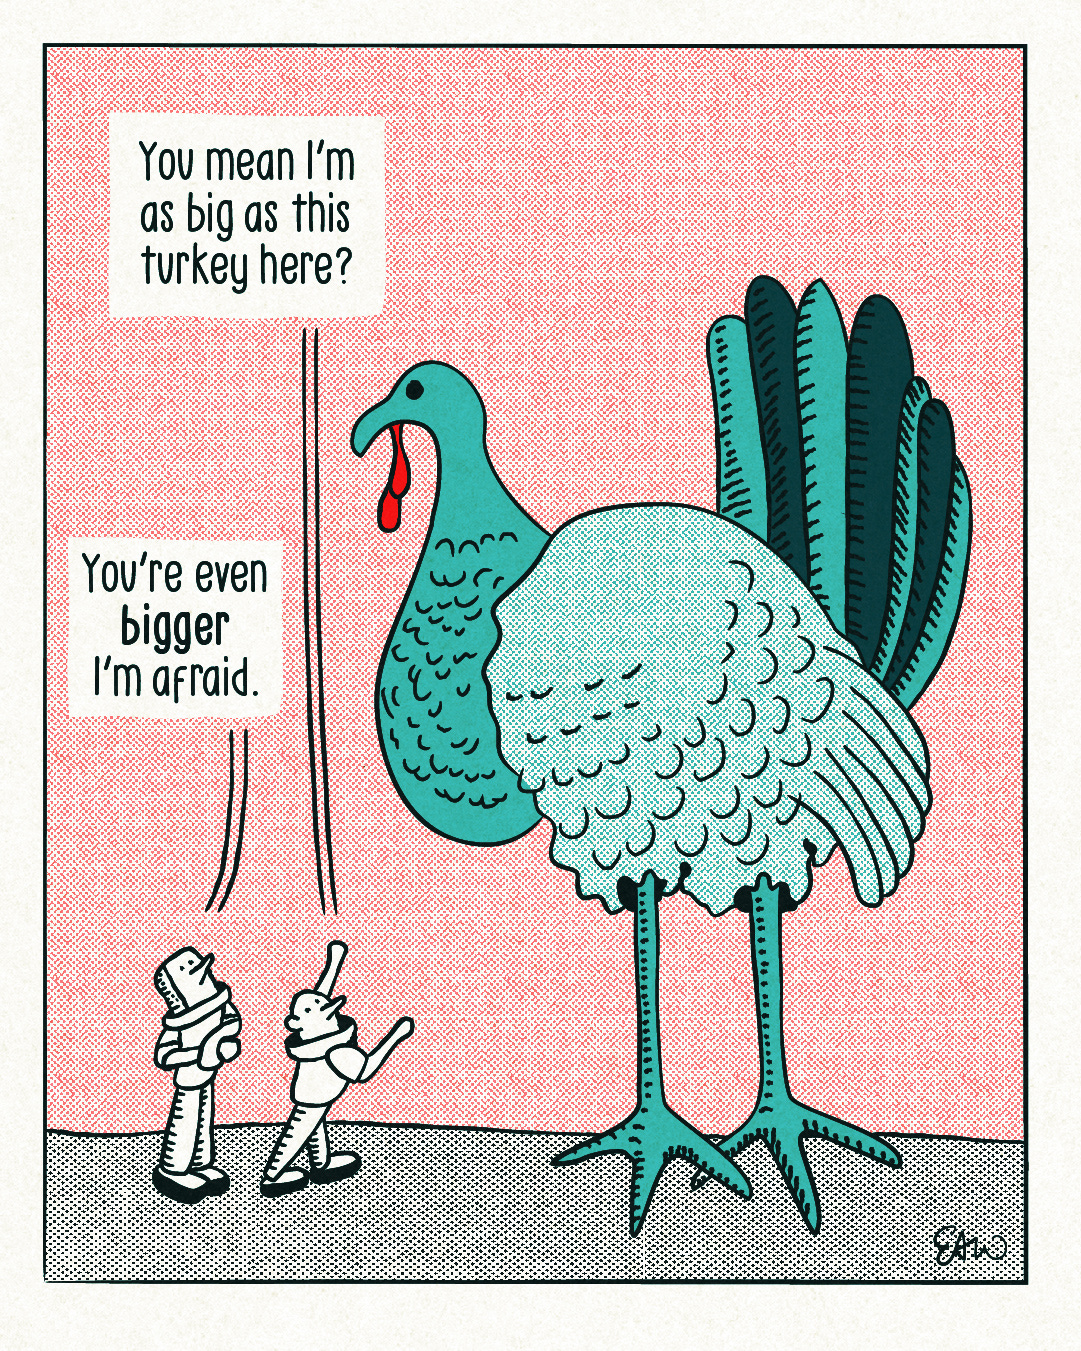 Panel two of two of a cartoon drawn in a vintage style. The viewpoint is wider than the first panel to reveal a larger turkey with comically tall legs towering over the two characters. The turkey looks to be at least four times as tall. It's also revealed that the tree trunk in the first panel was the leg of the giant turkey. Both look up in awe at the turkey, and the character on the right asks, “You mean I'm as big as this turkey here?” The character on the left replies, “Even bigger I'm afraid.”